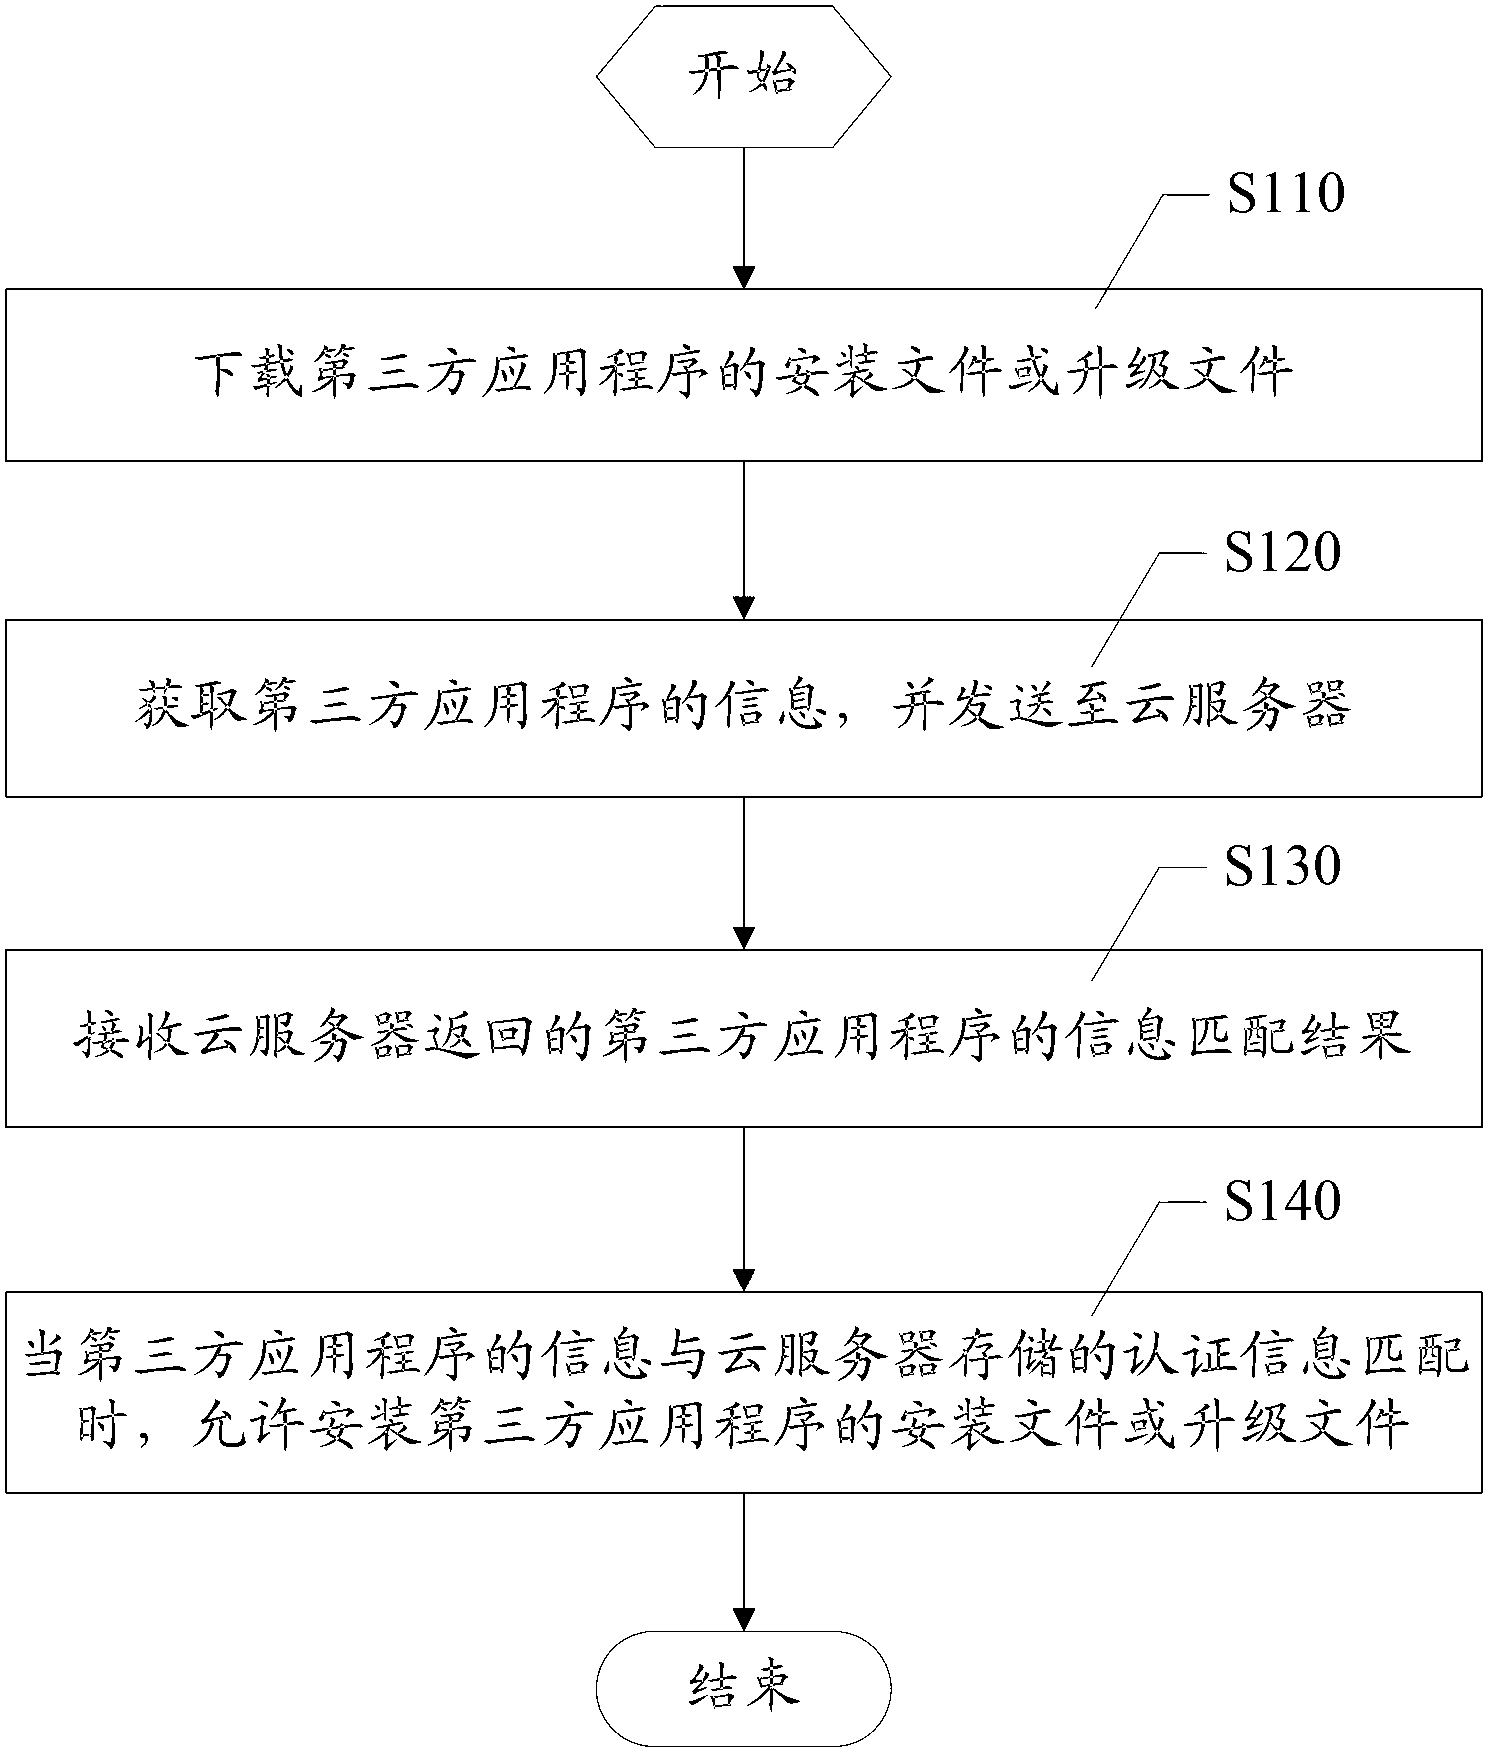 Method for certifying third-party application program, mobile terminal and cloud server